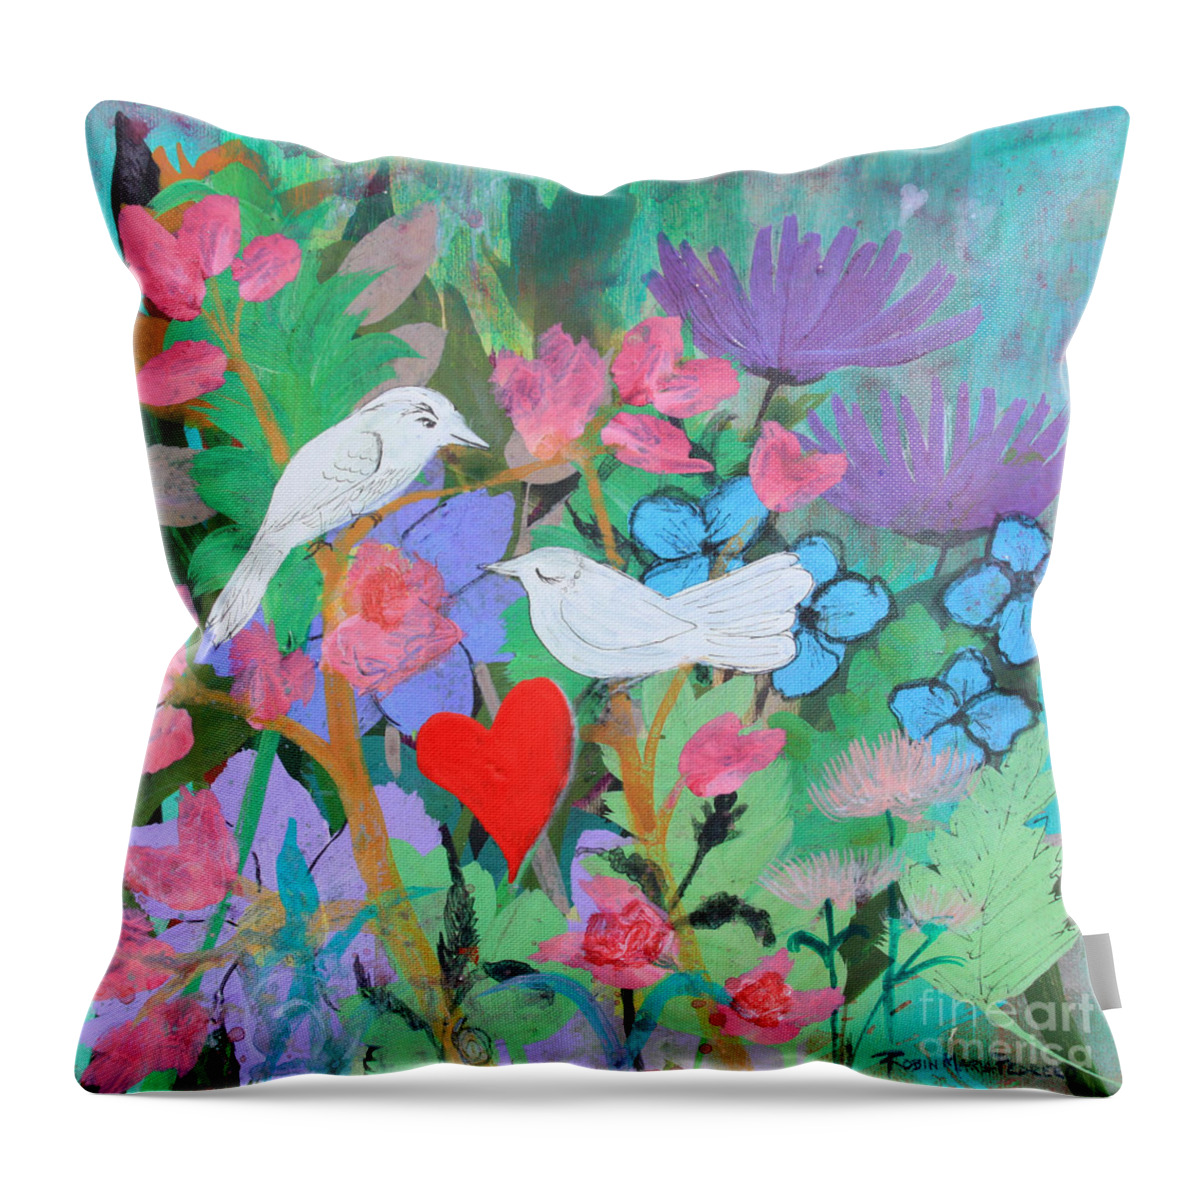 Chaucer Throw Pillow featuring the painting Chaucer's Love Birds by Robin Pedrero